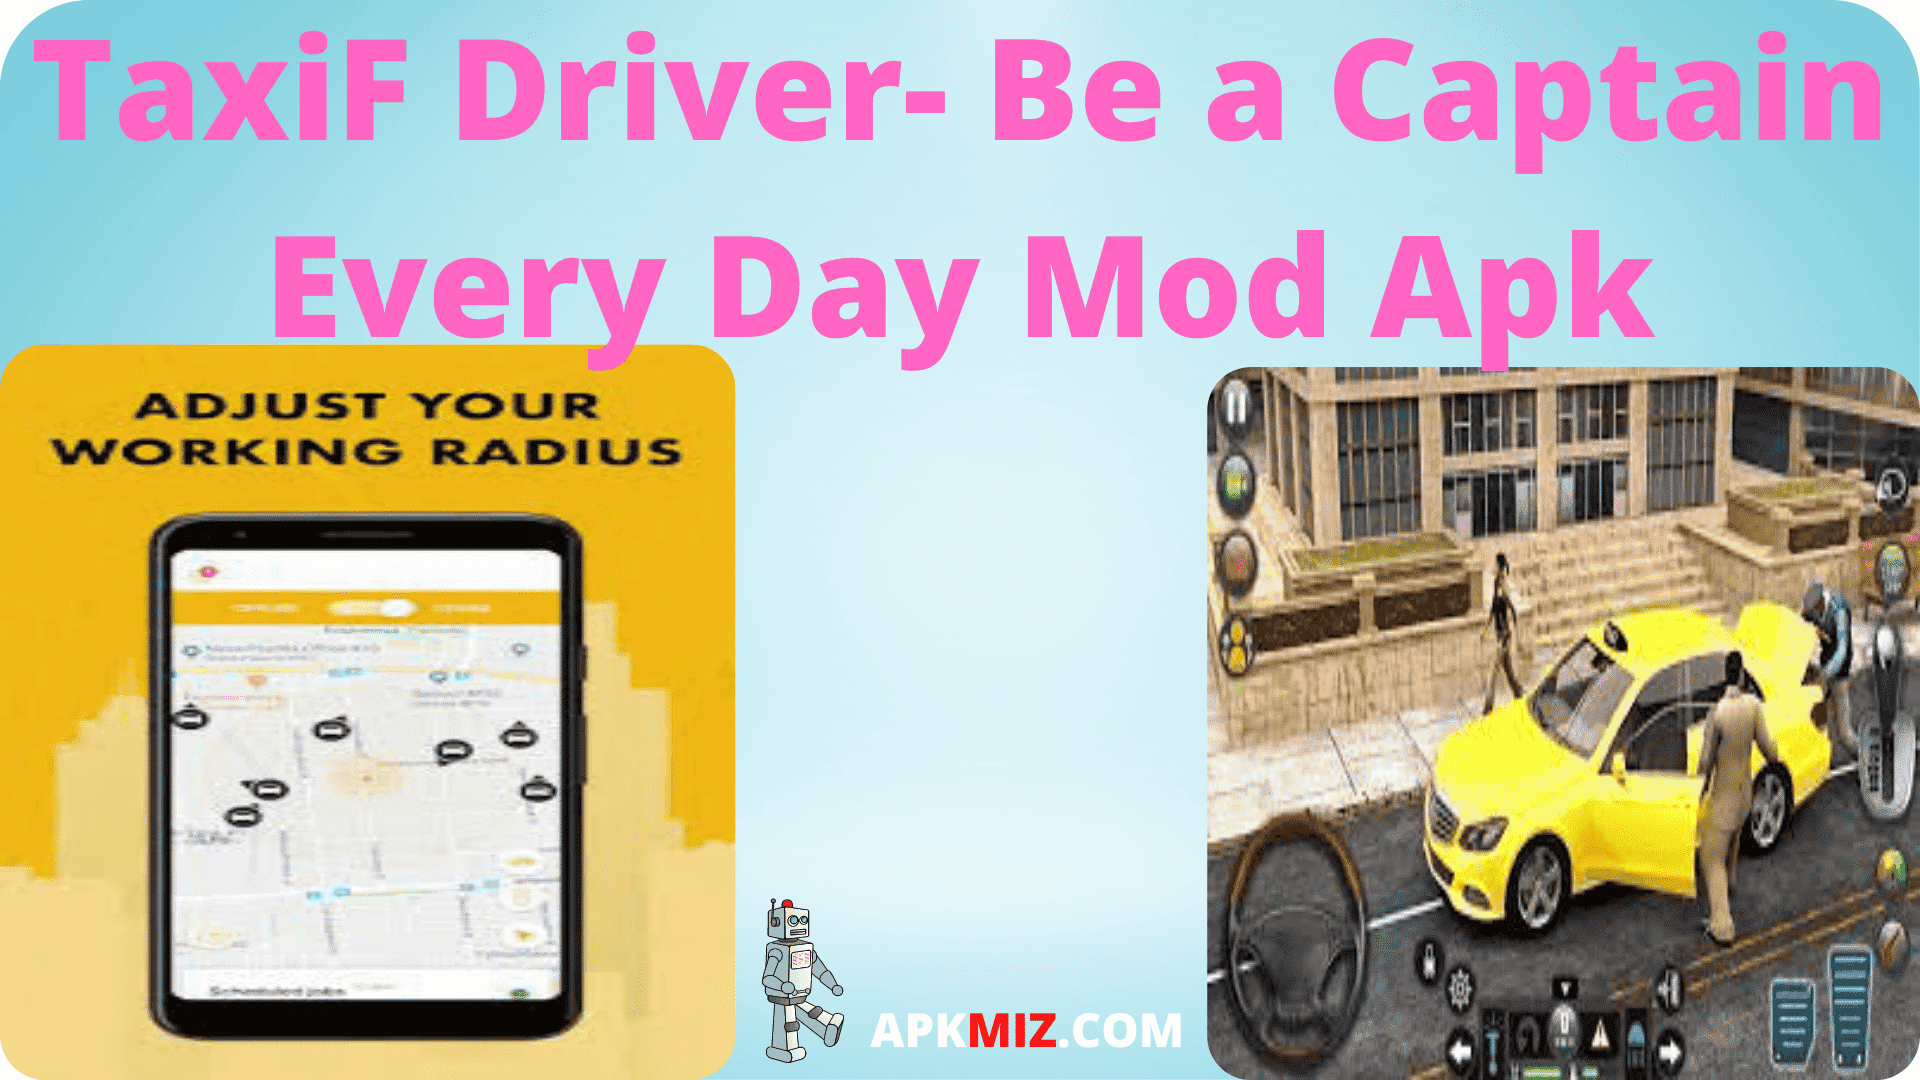 TaxiF Driver- Be a Captain Every Day Mod Apk